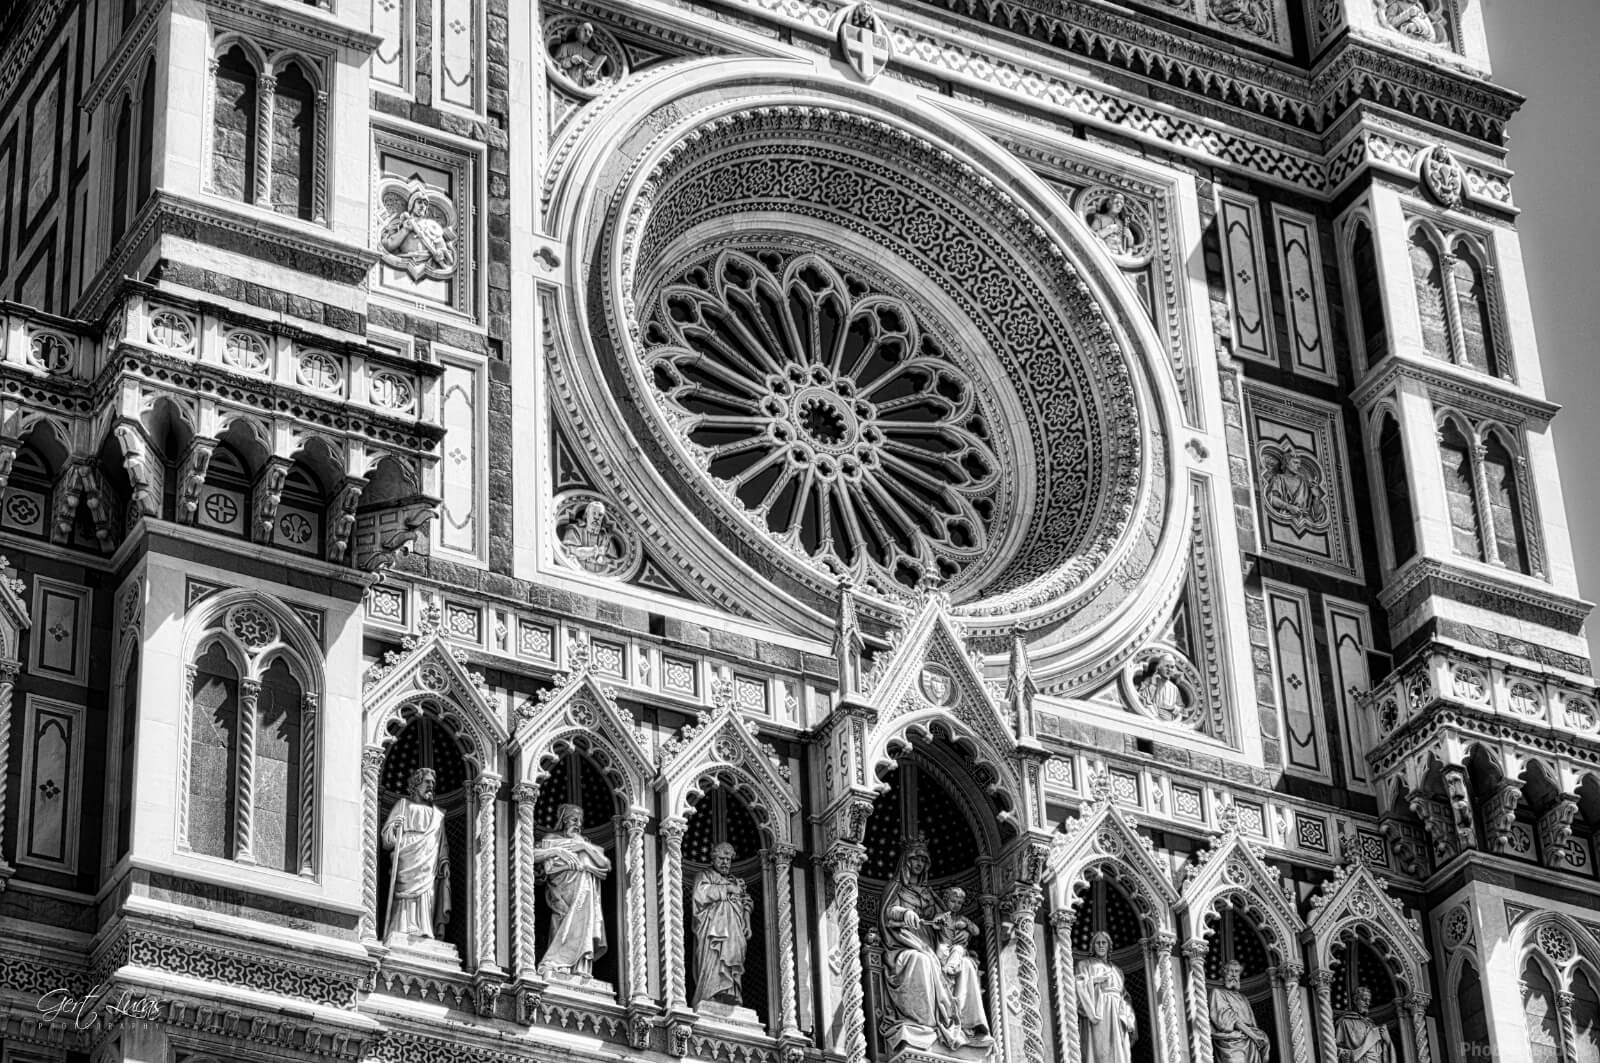 Image of Piazza del Duomo, Firenze by Gert Lucas